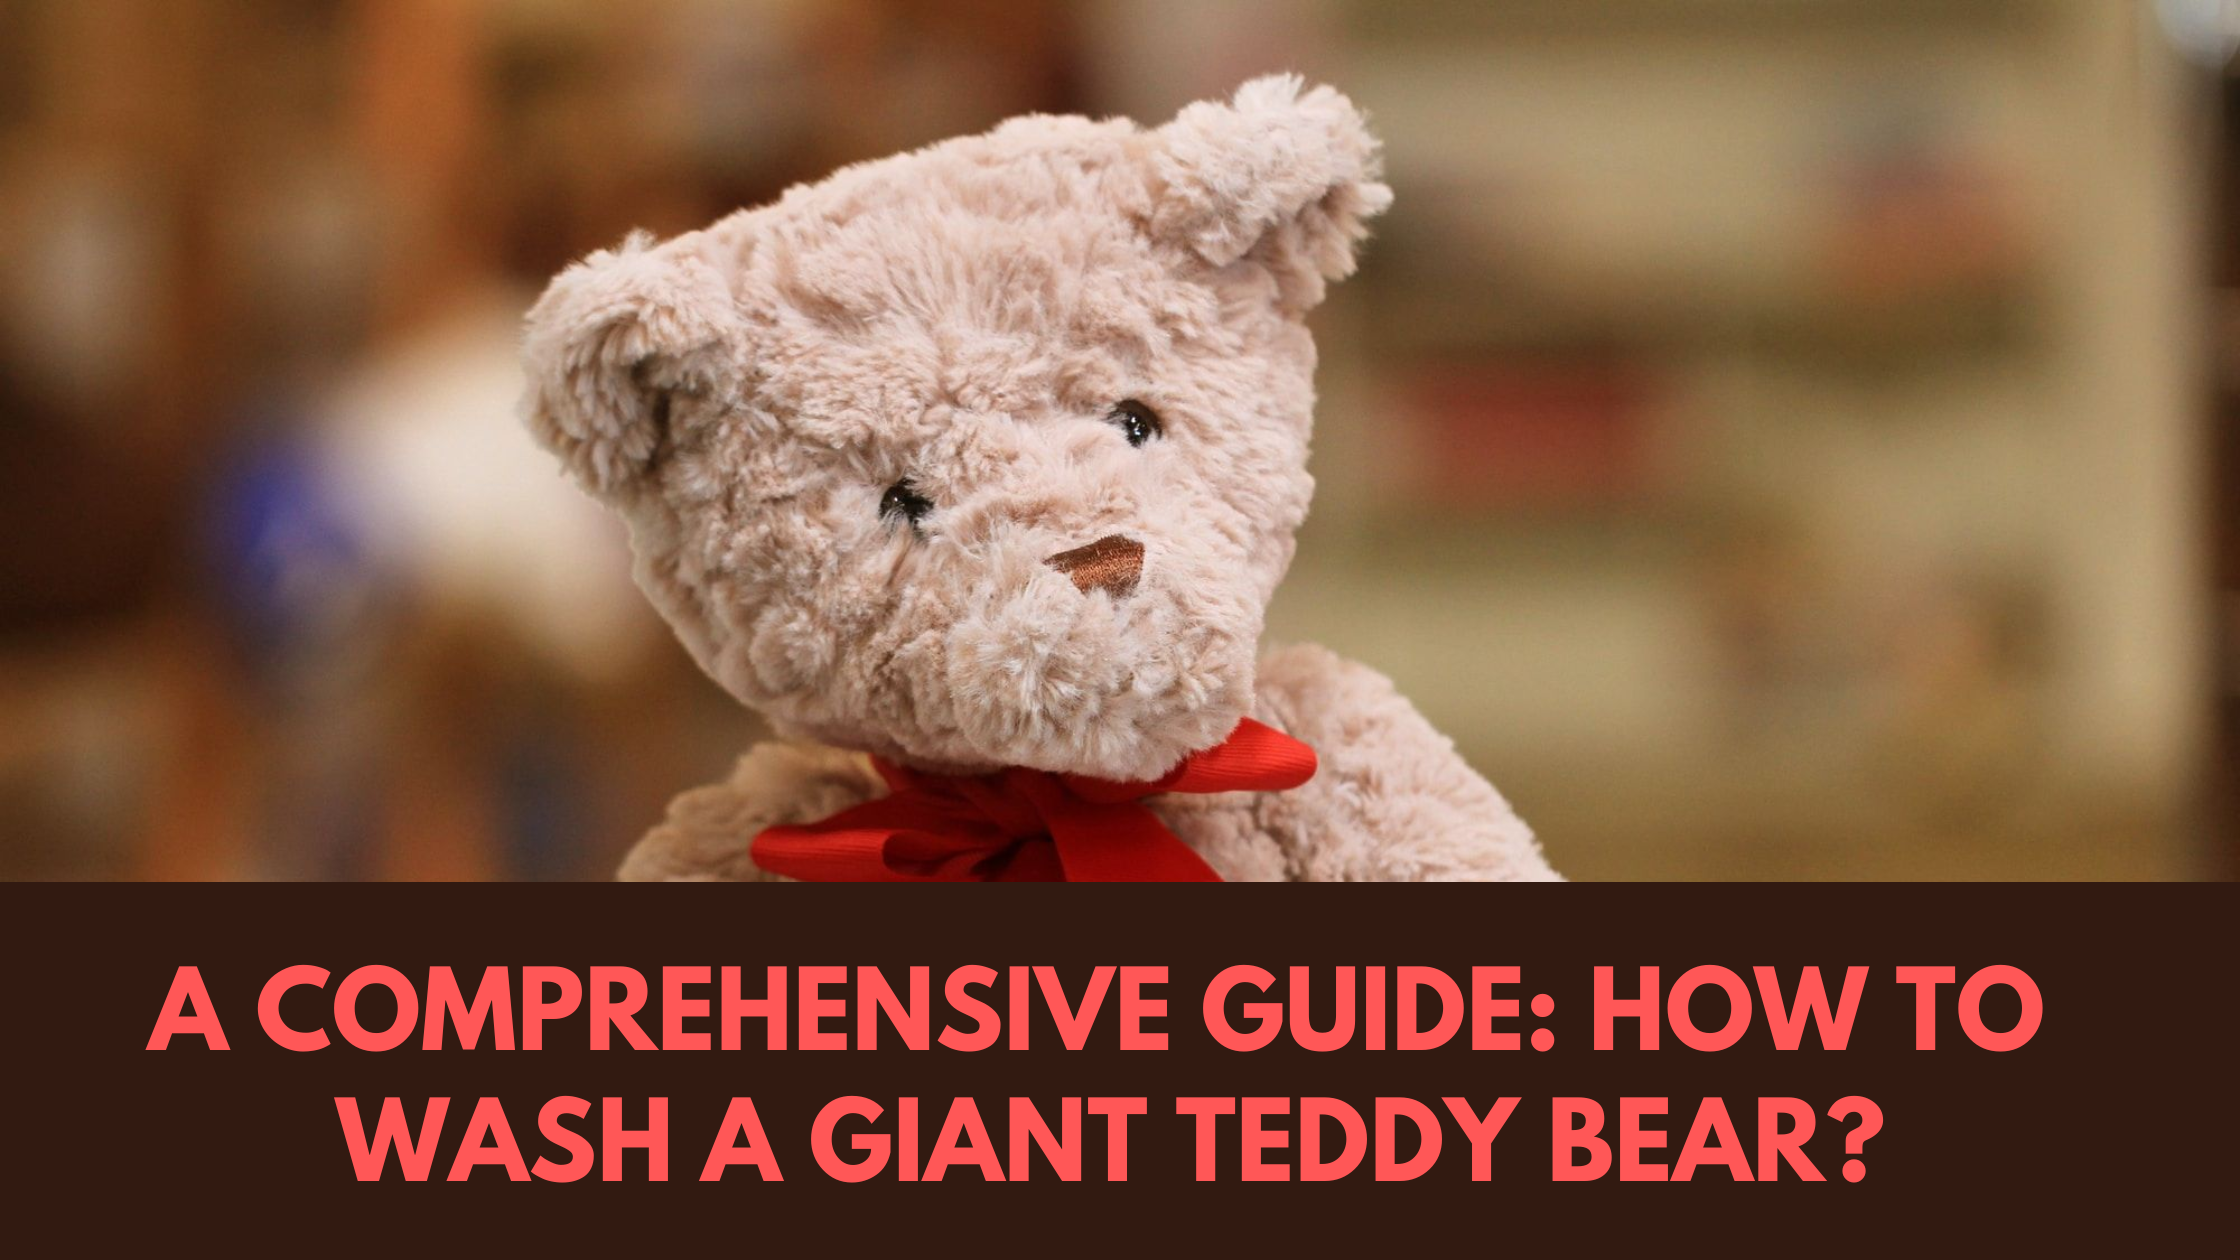 A Comprehensive Guide: How To Wash a Giant Teddy Bear?